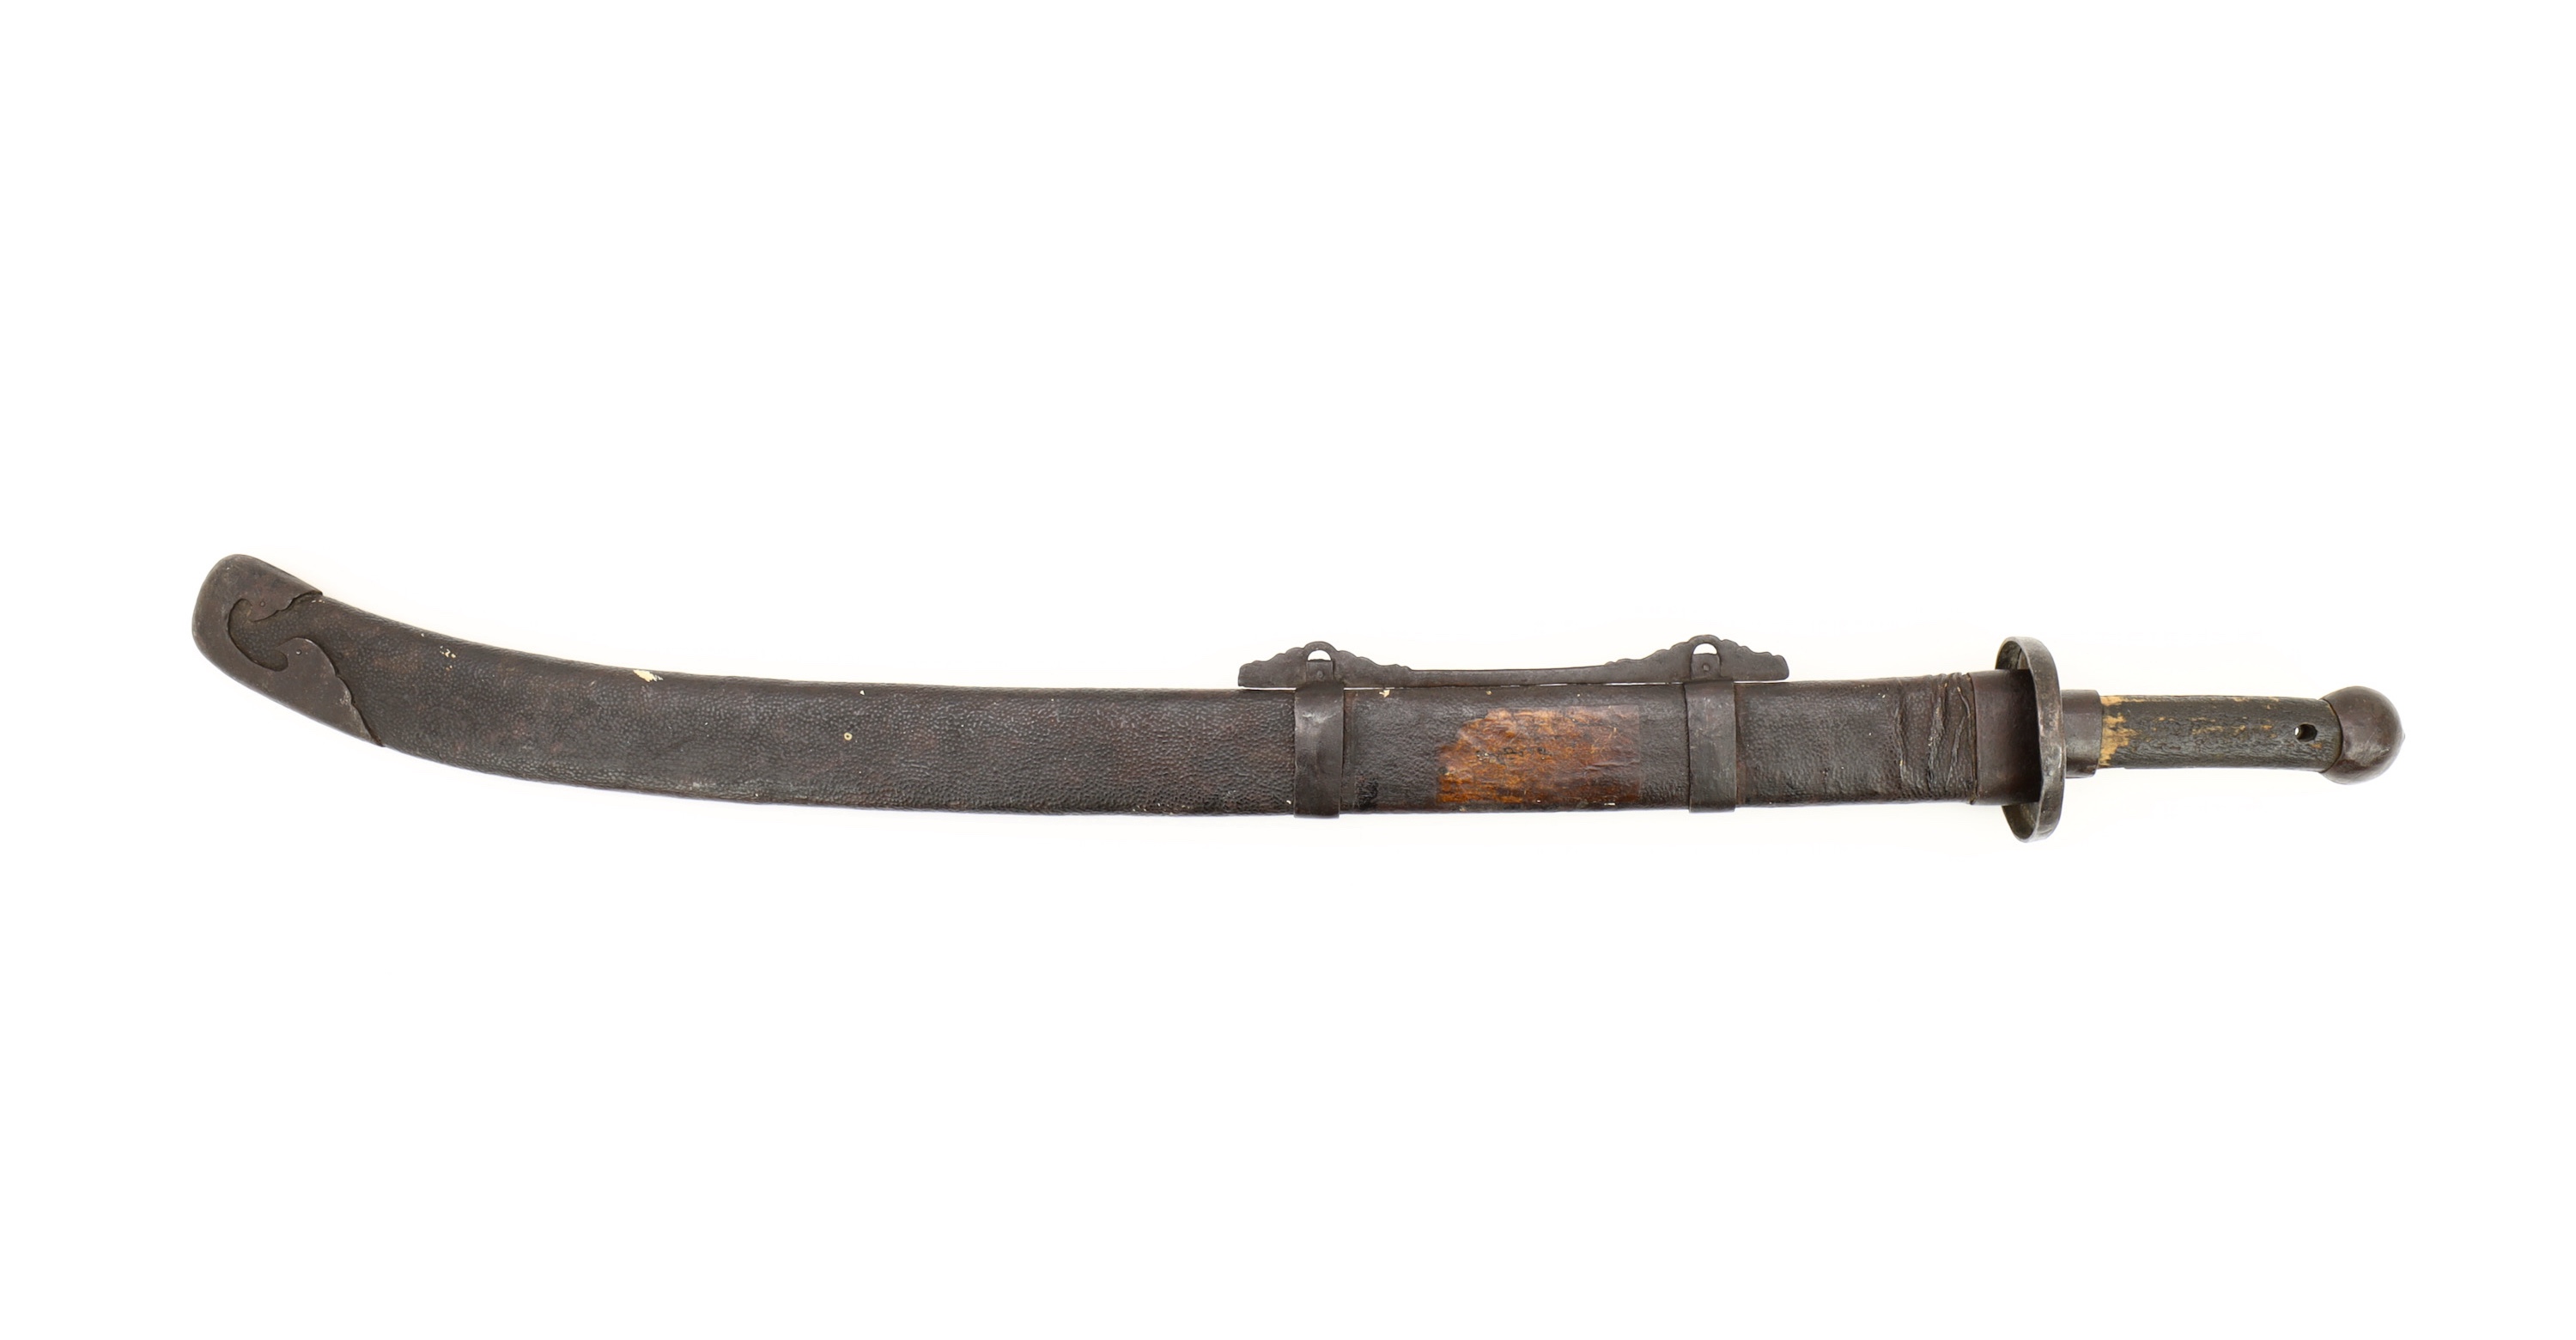 Qing military saber with Manchu label